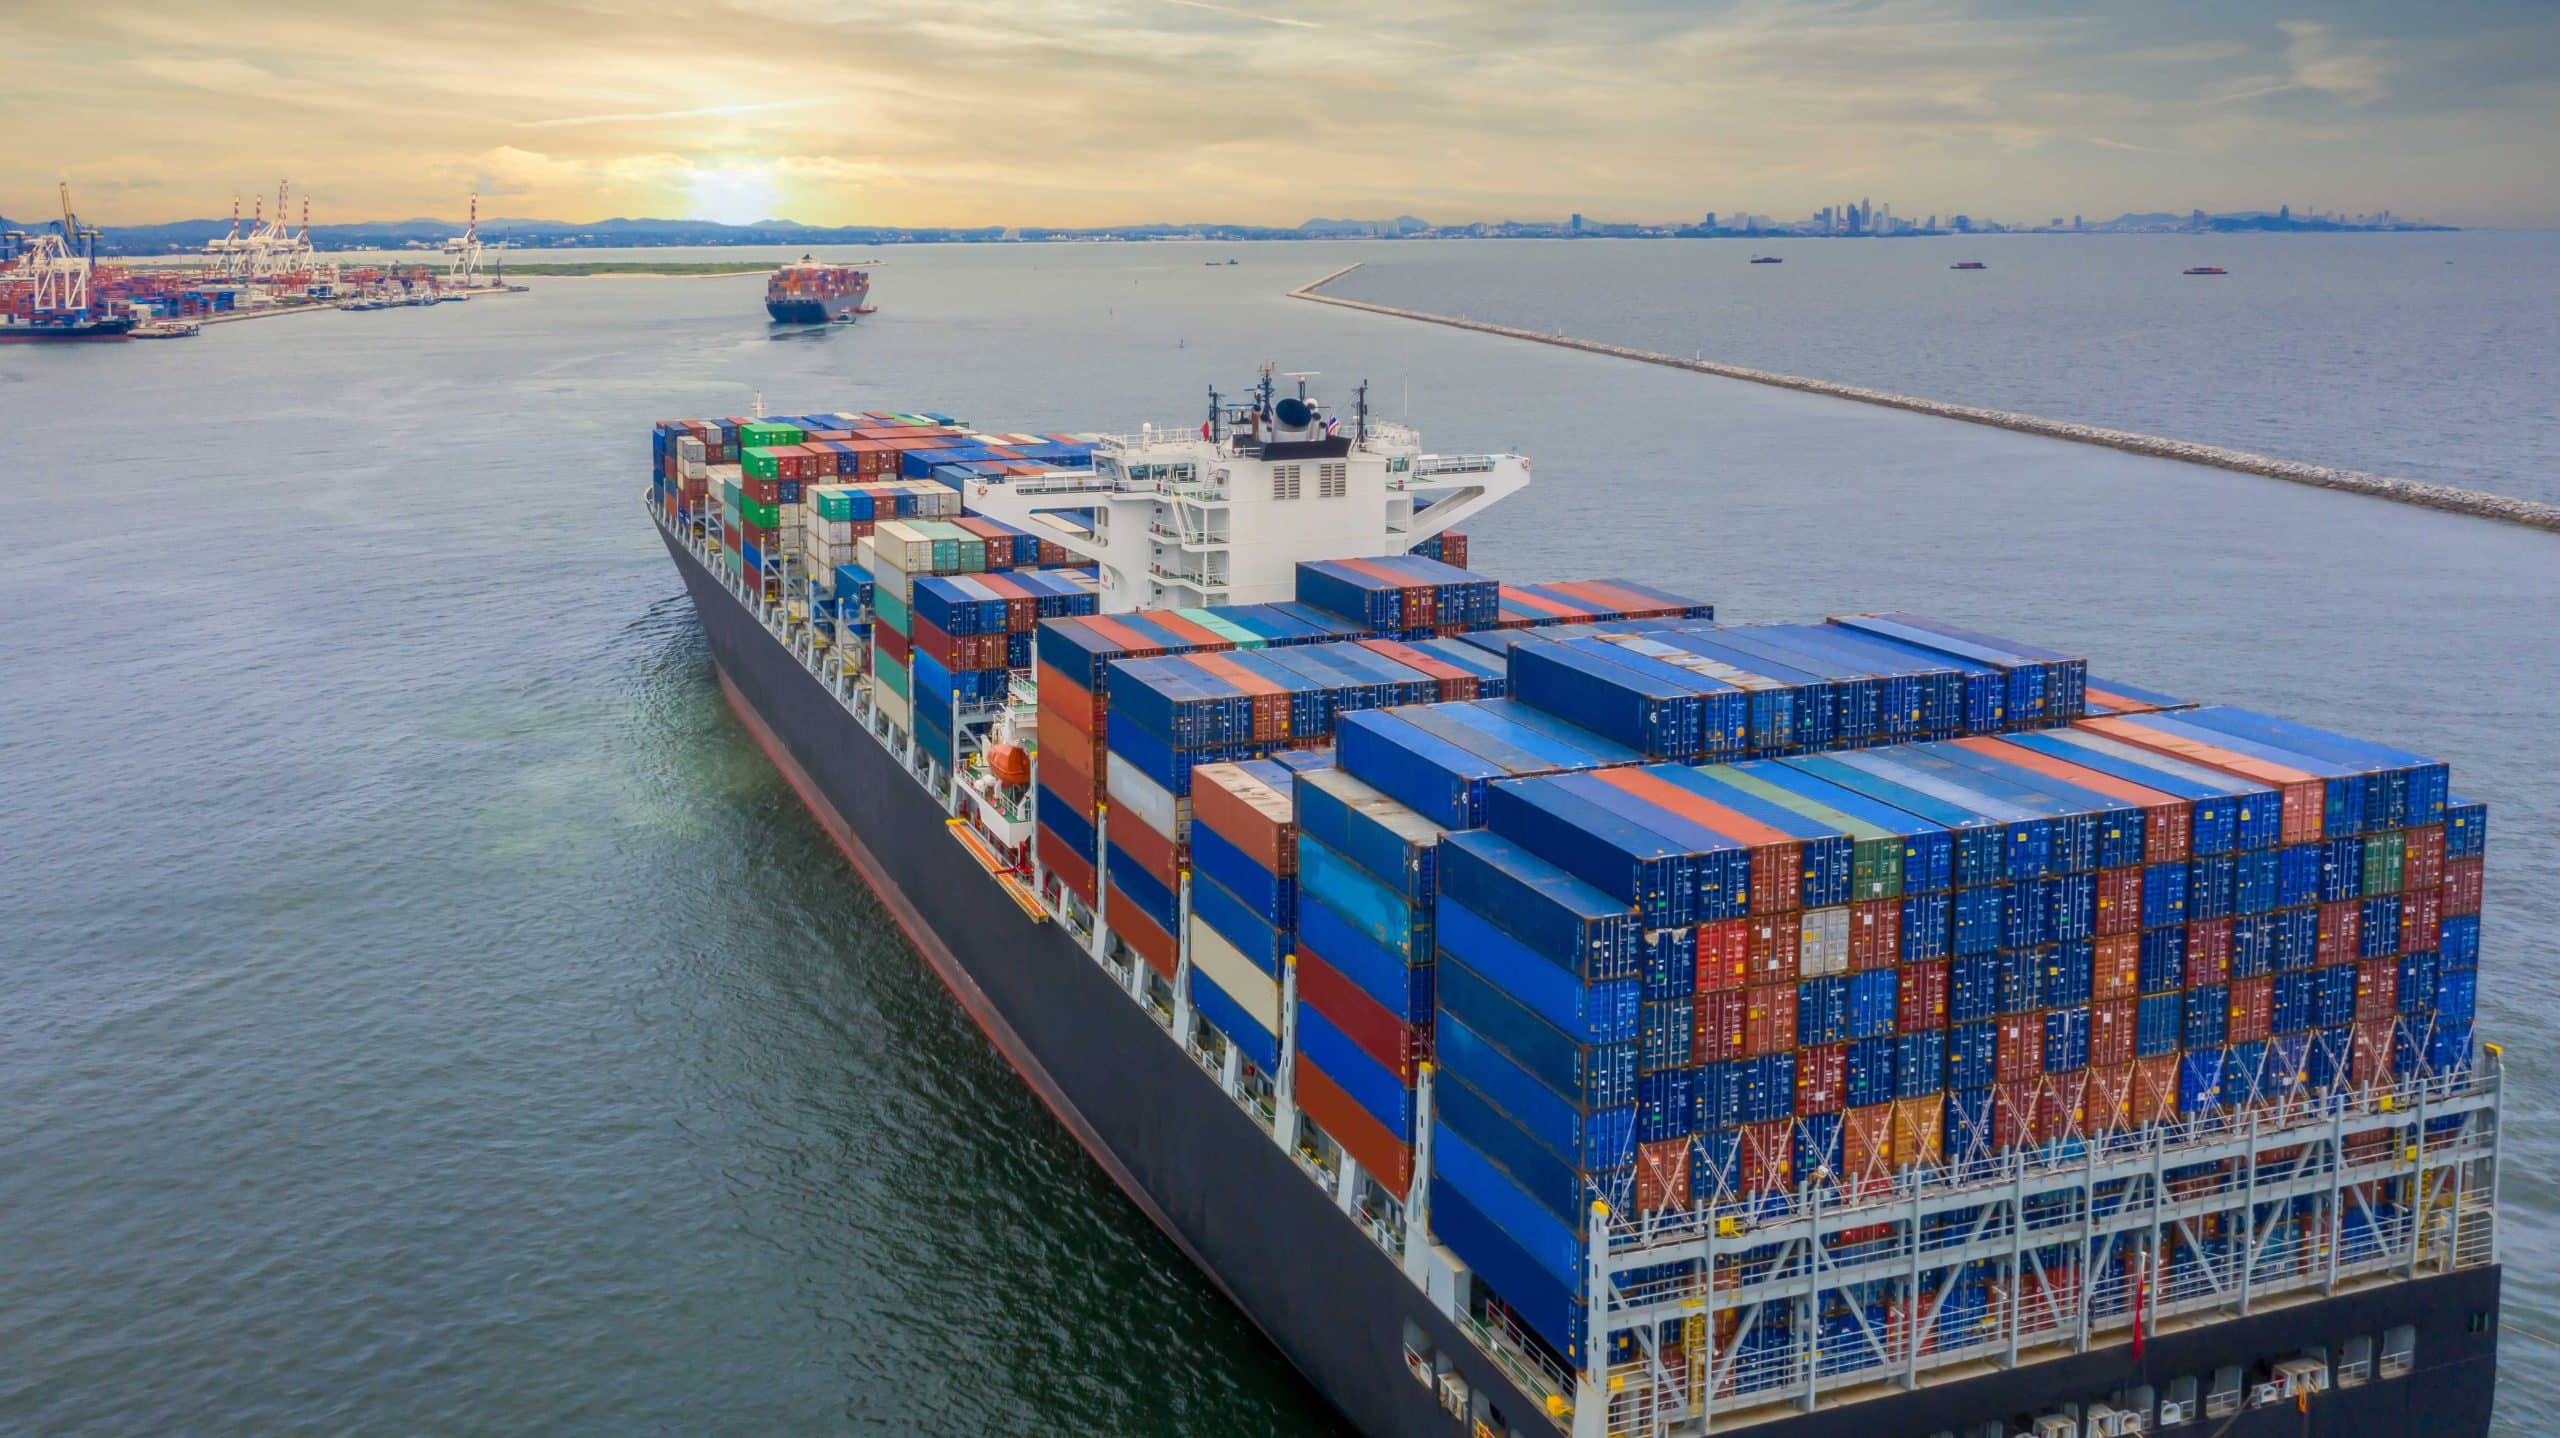 An image of a container ship, symbolizing global trade.